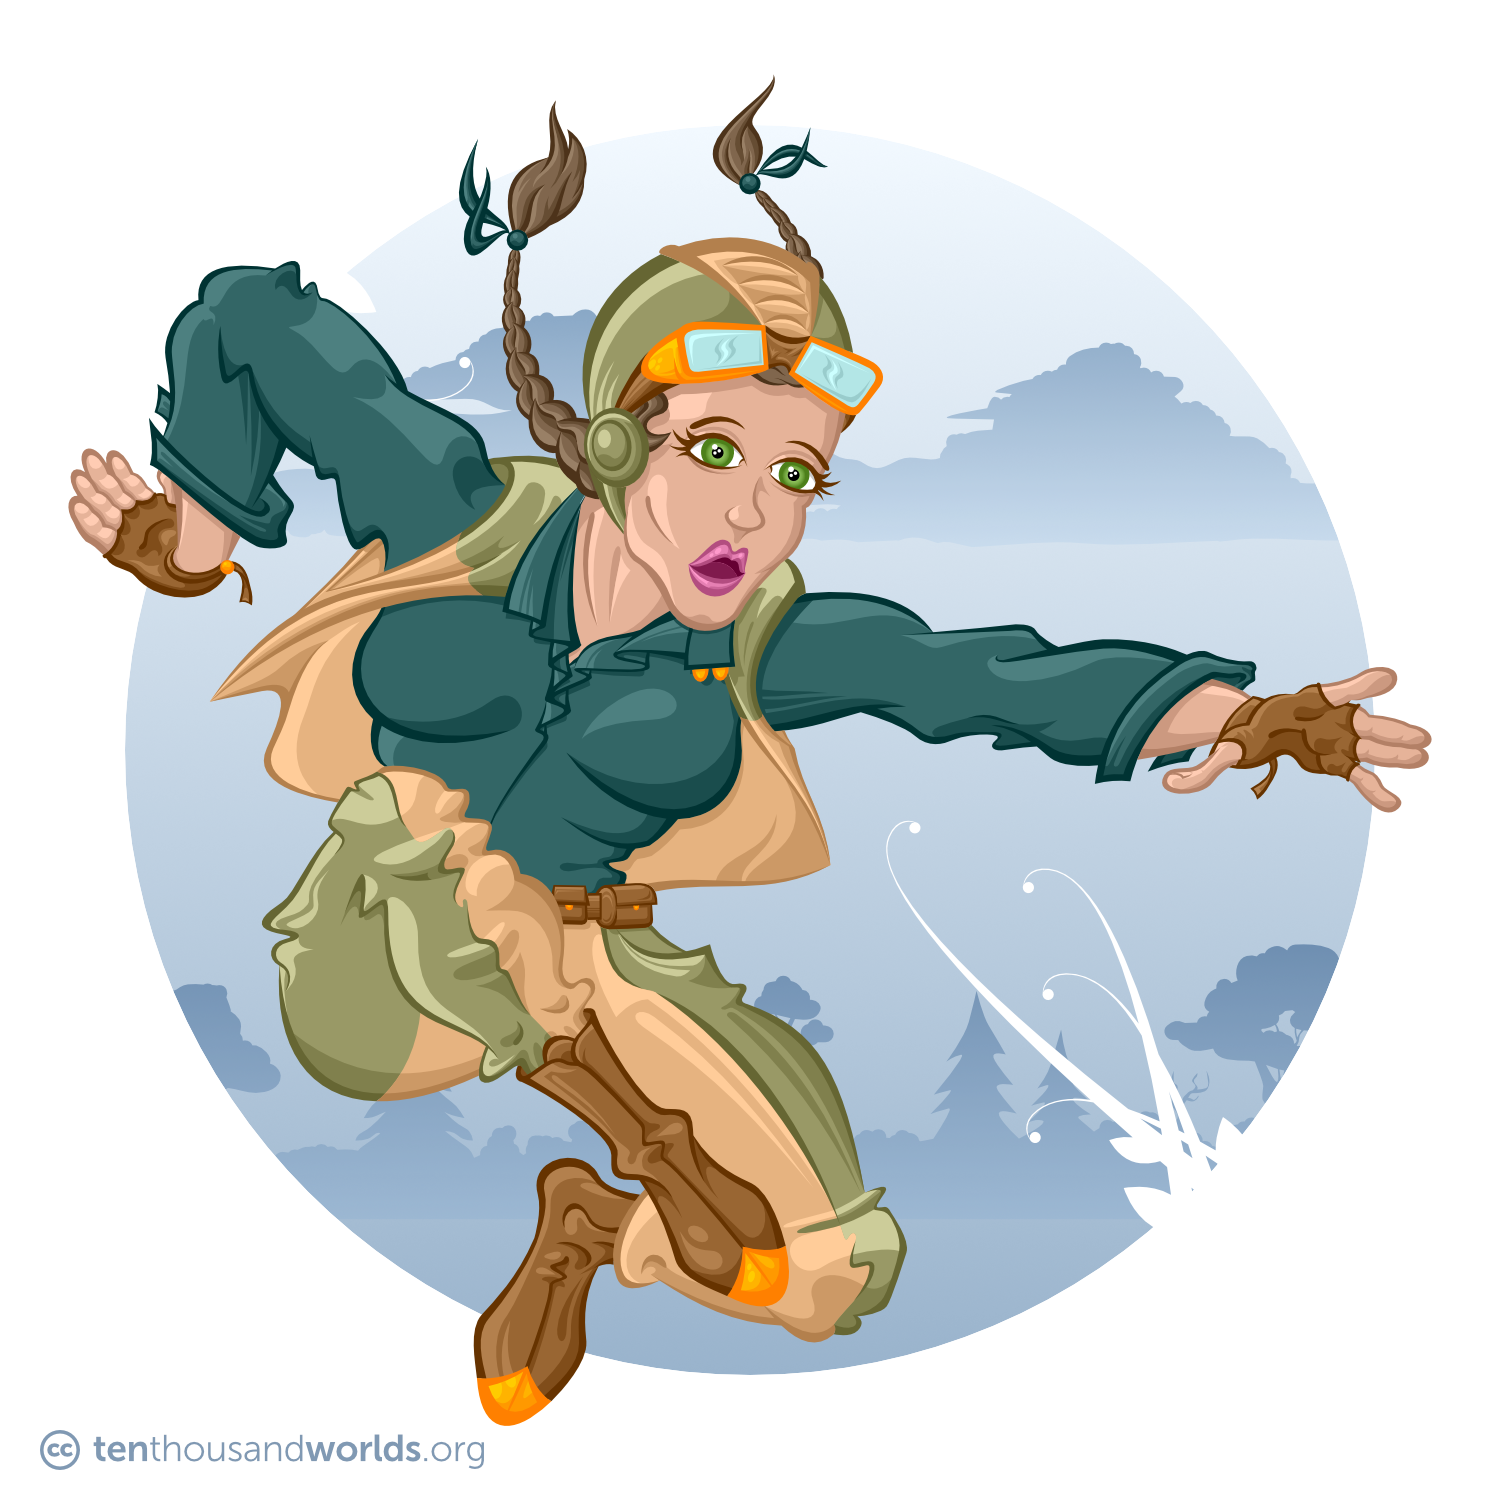 A leaping woman whose long brown braids poke out from under an olive and tan leather cap with brass goggles. She wears fingerless leather gloves; brass-tipped boots; an aquamarine work shirt, an olive and tan work vest and trousers; and a leather belt full of pouches.